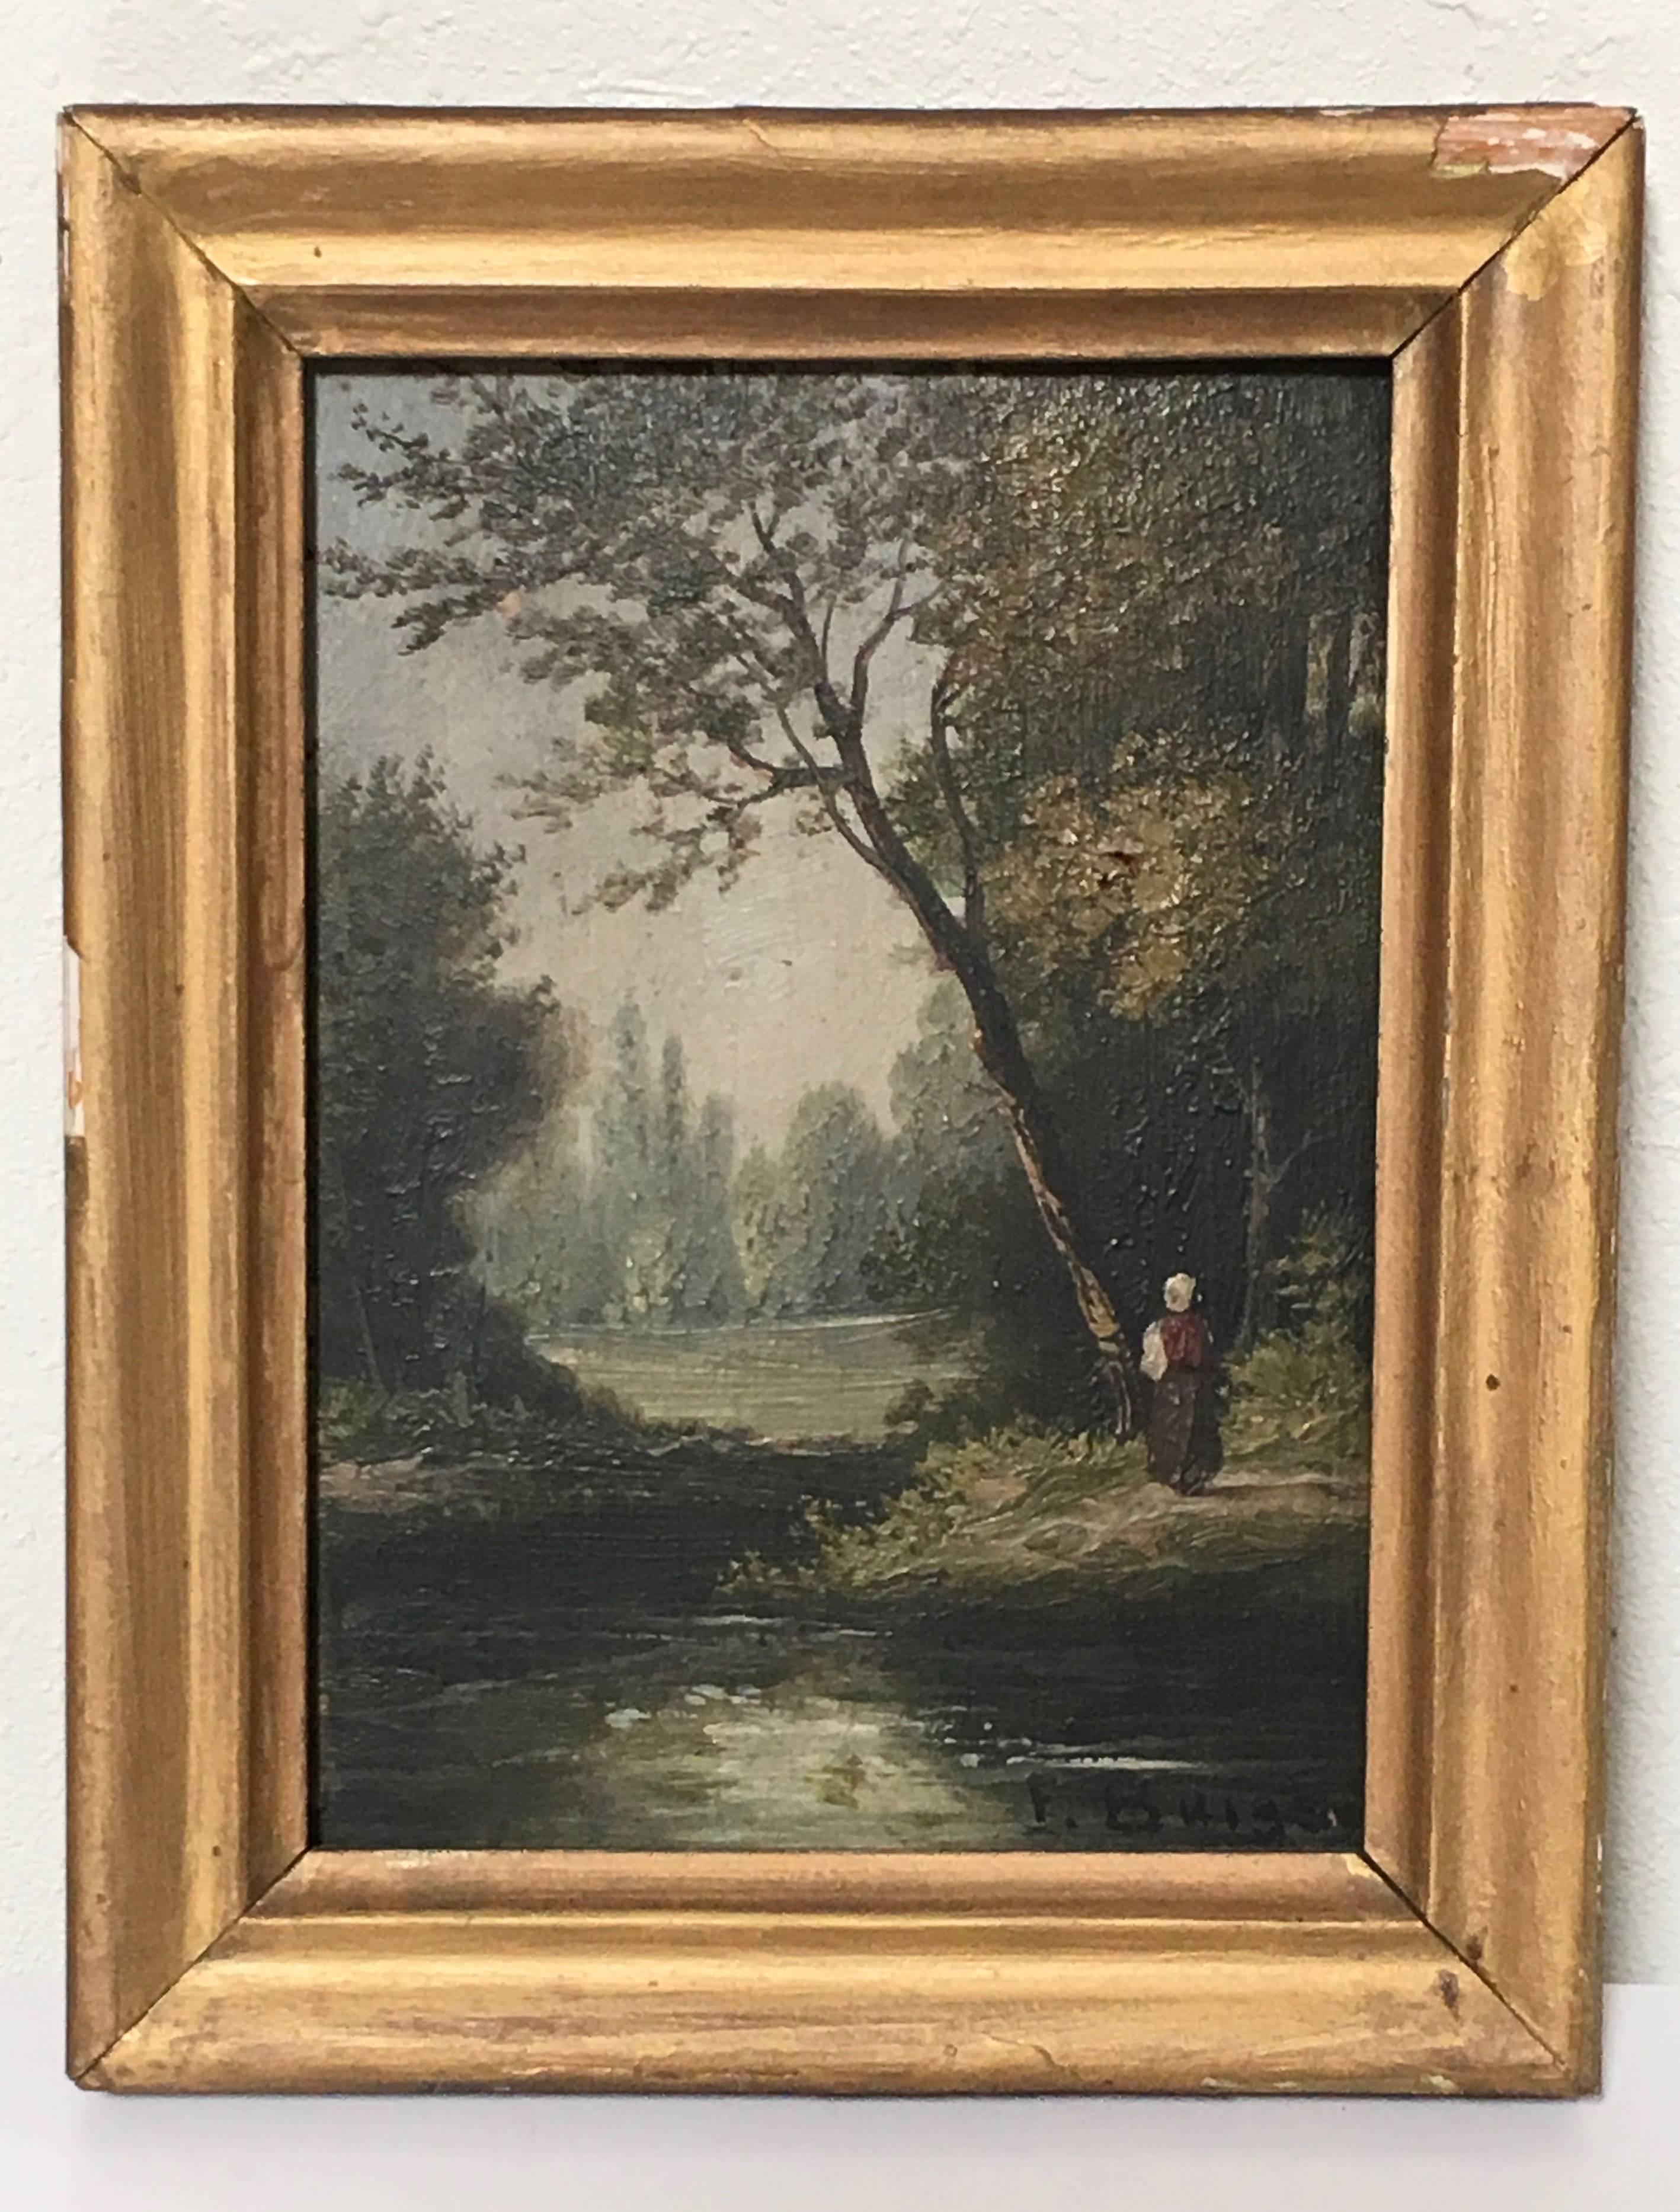 Antique 19th century, French landscape paintings oil on board.